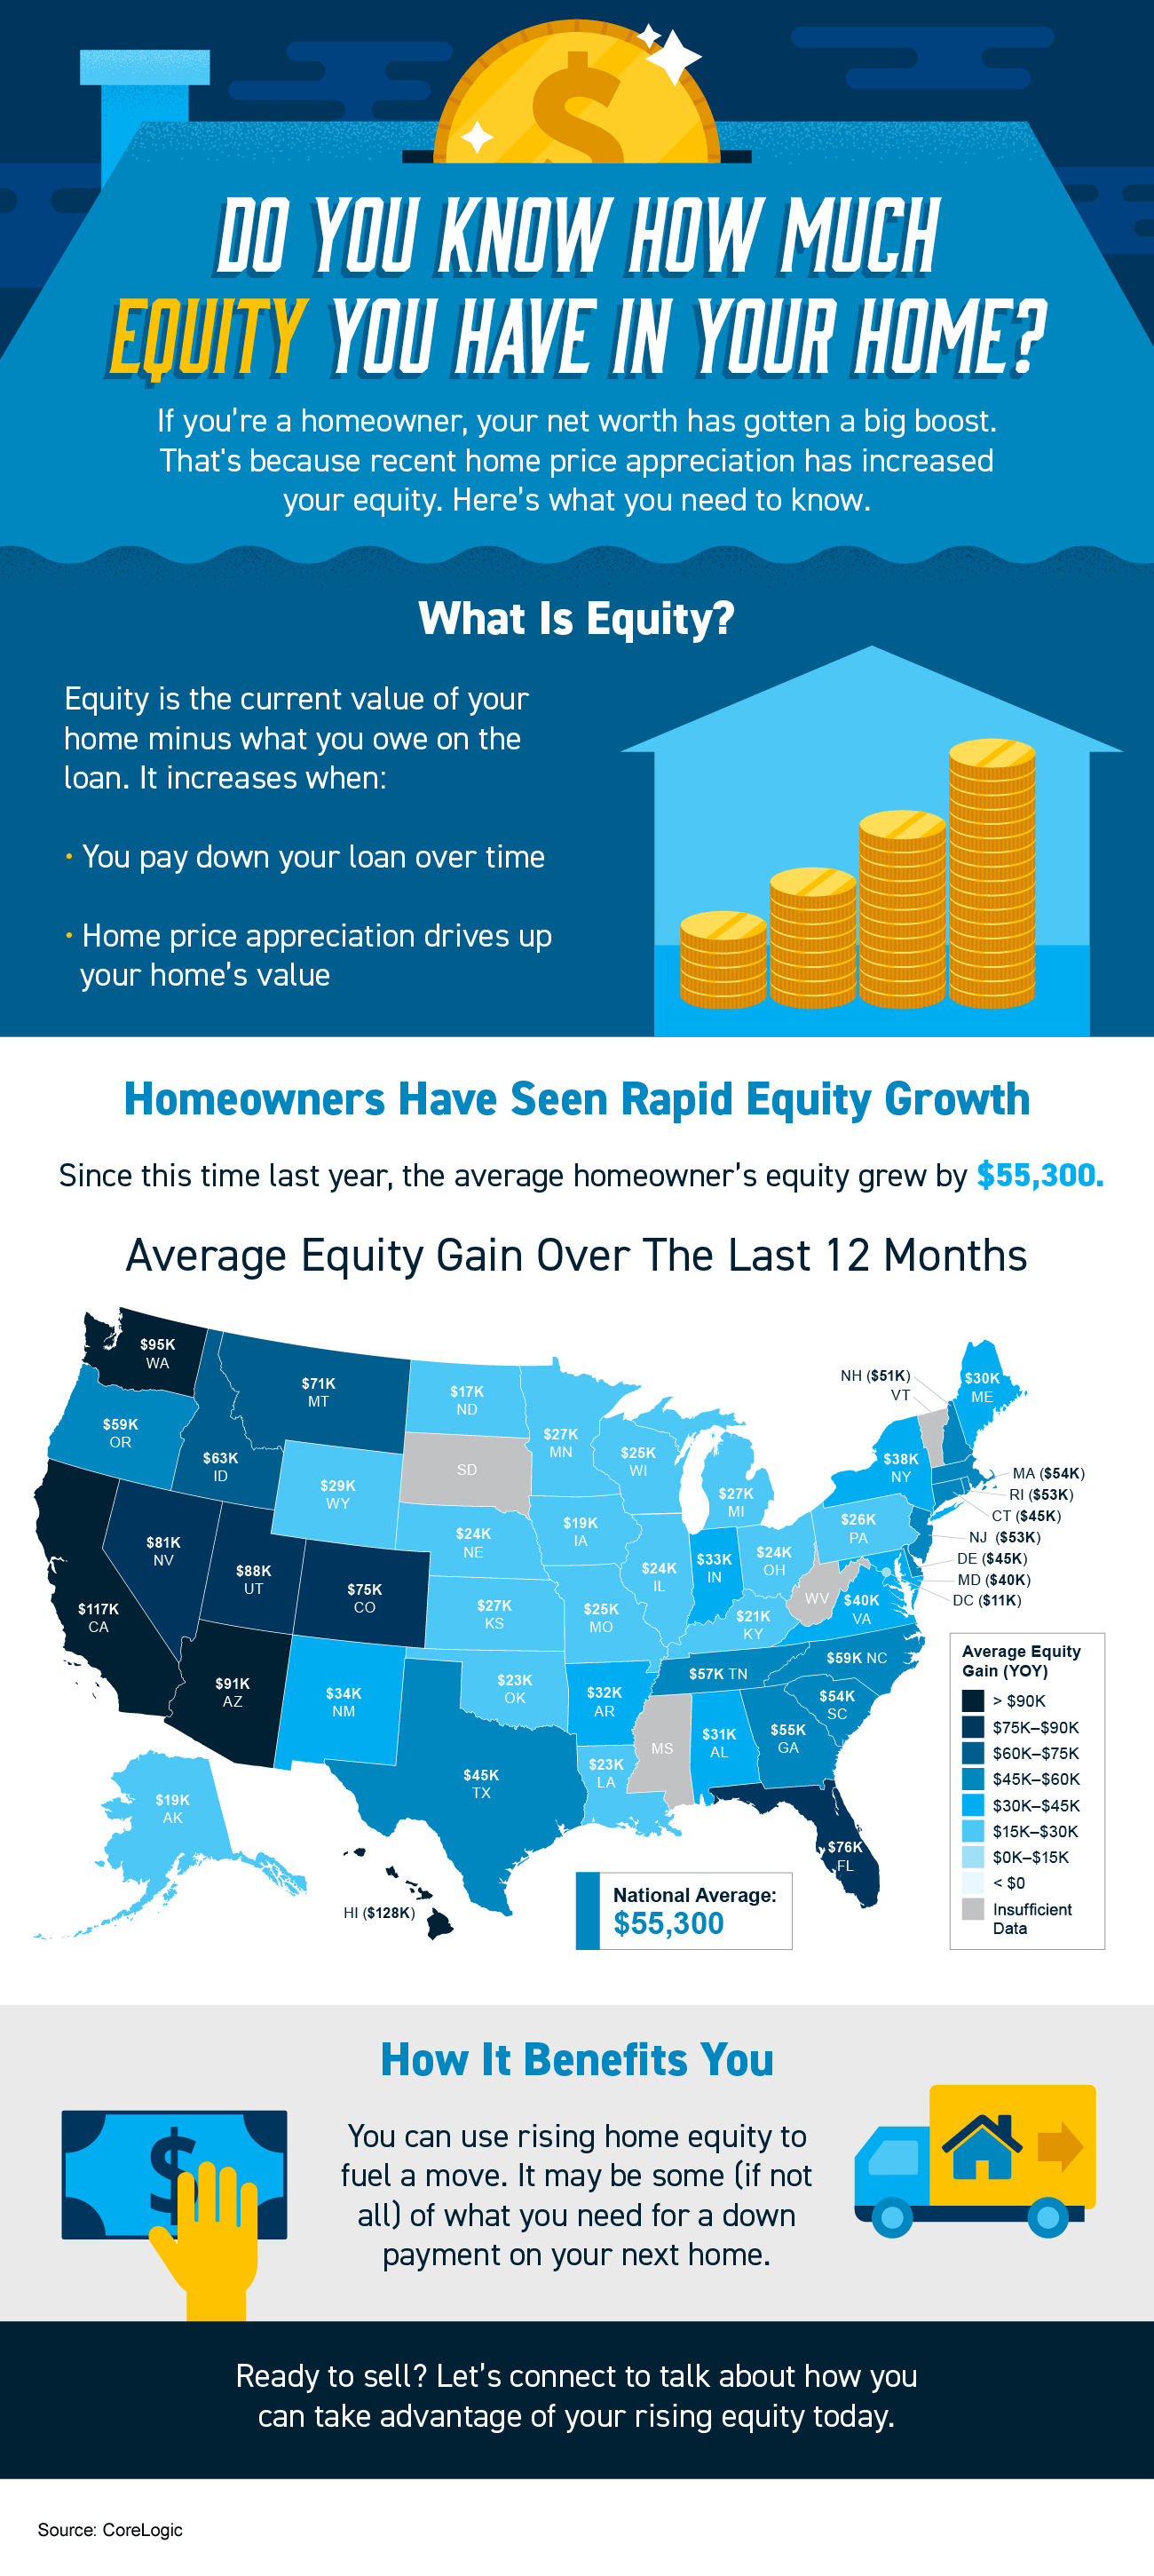 Do You Know How Much Equity You Have in Your Home? [INFOGRAPHIC] | Simplifying The Market